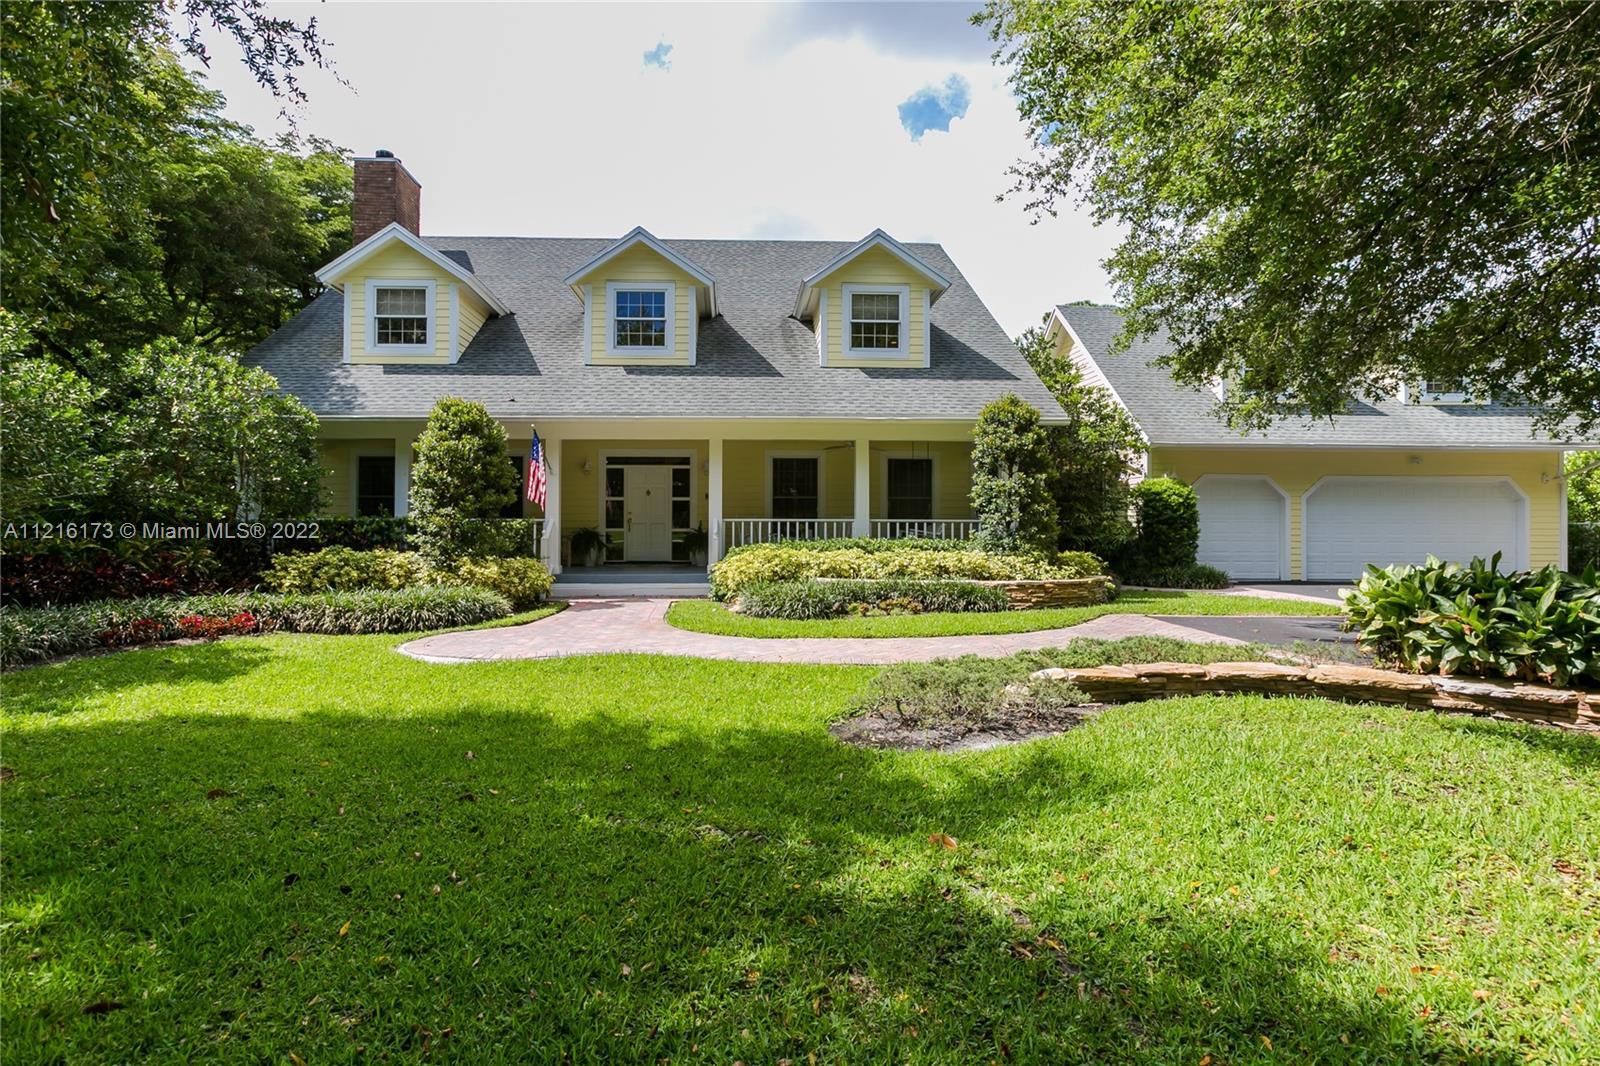 Beautiful two-story key west style home nestled on an acre with fantastic curb appeal!  The main hom